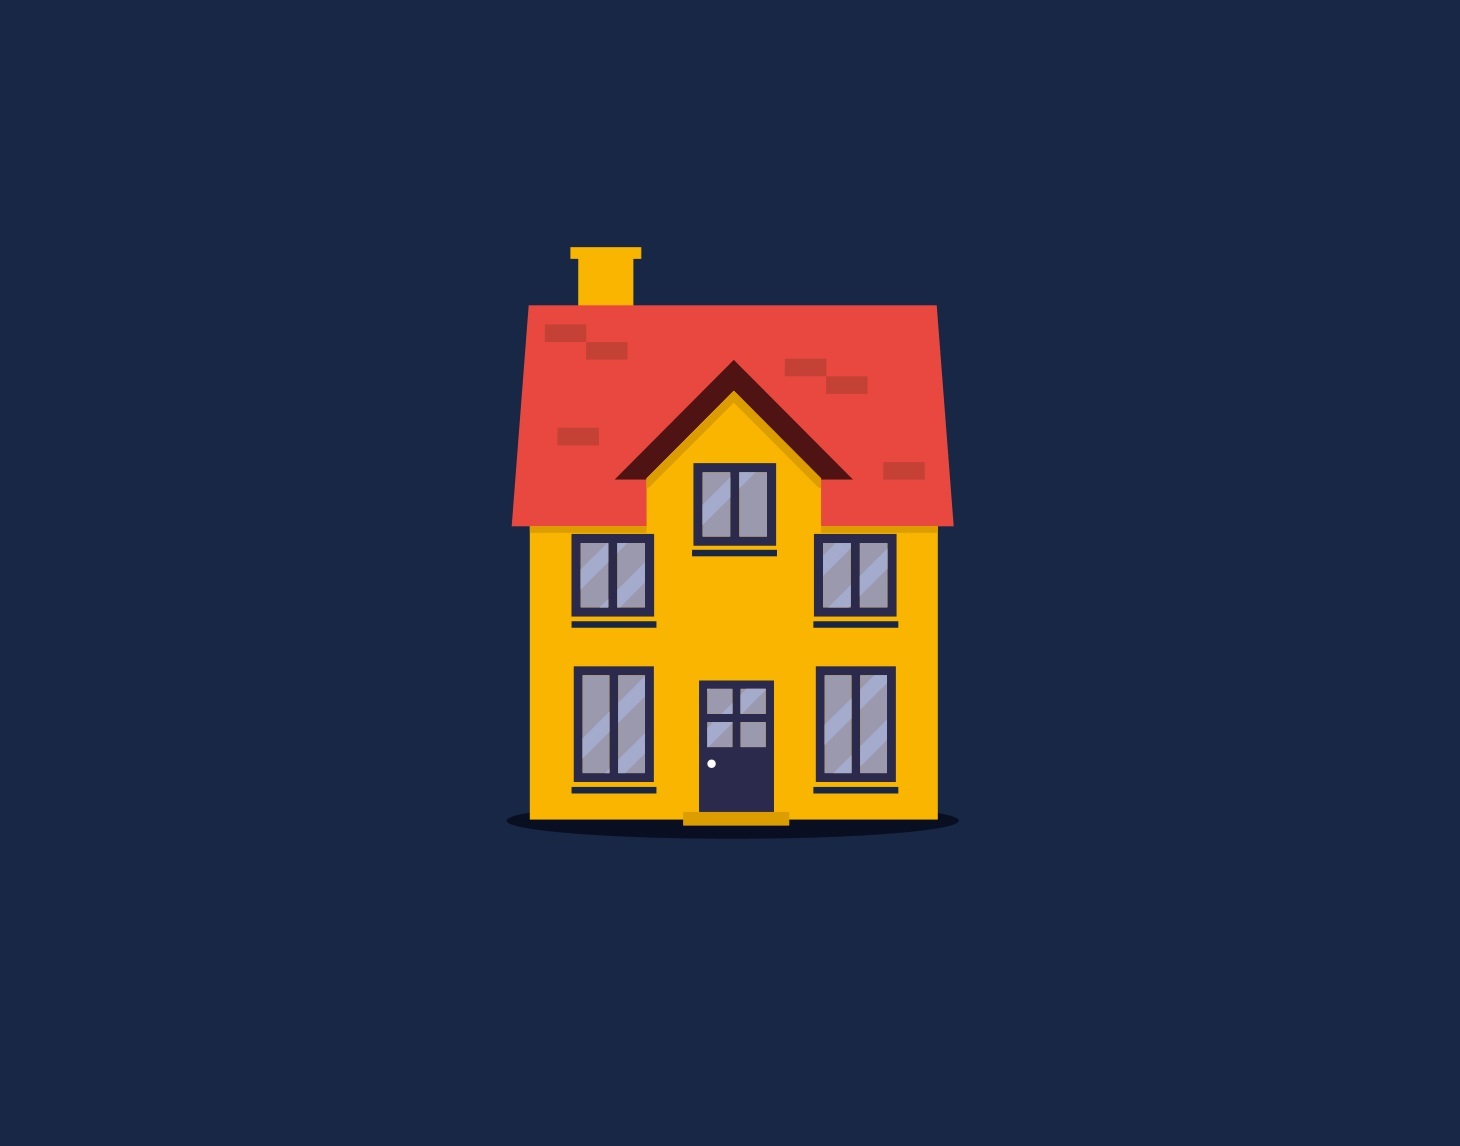 Animated image of a house